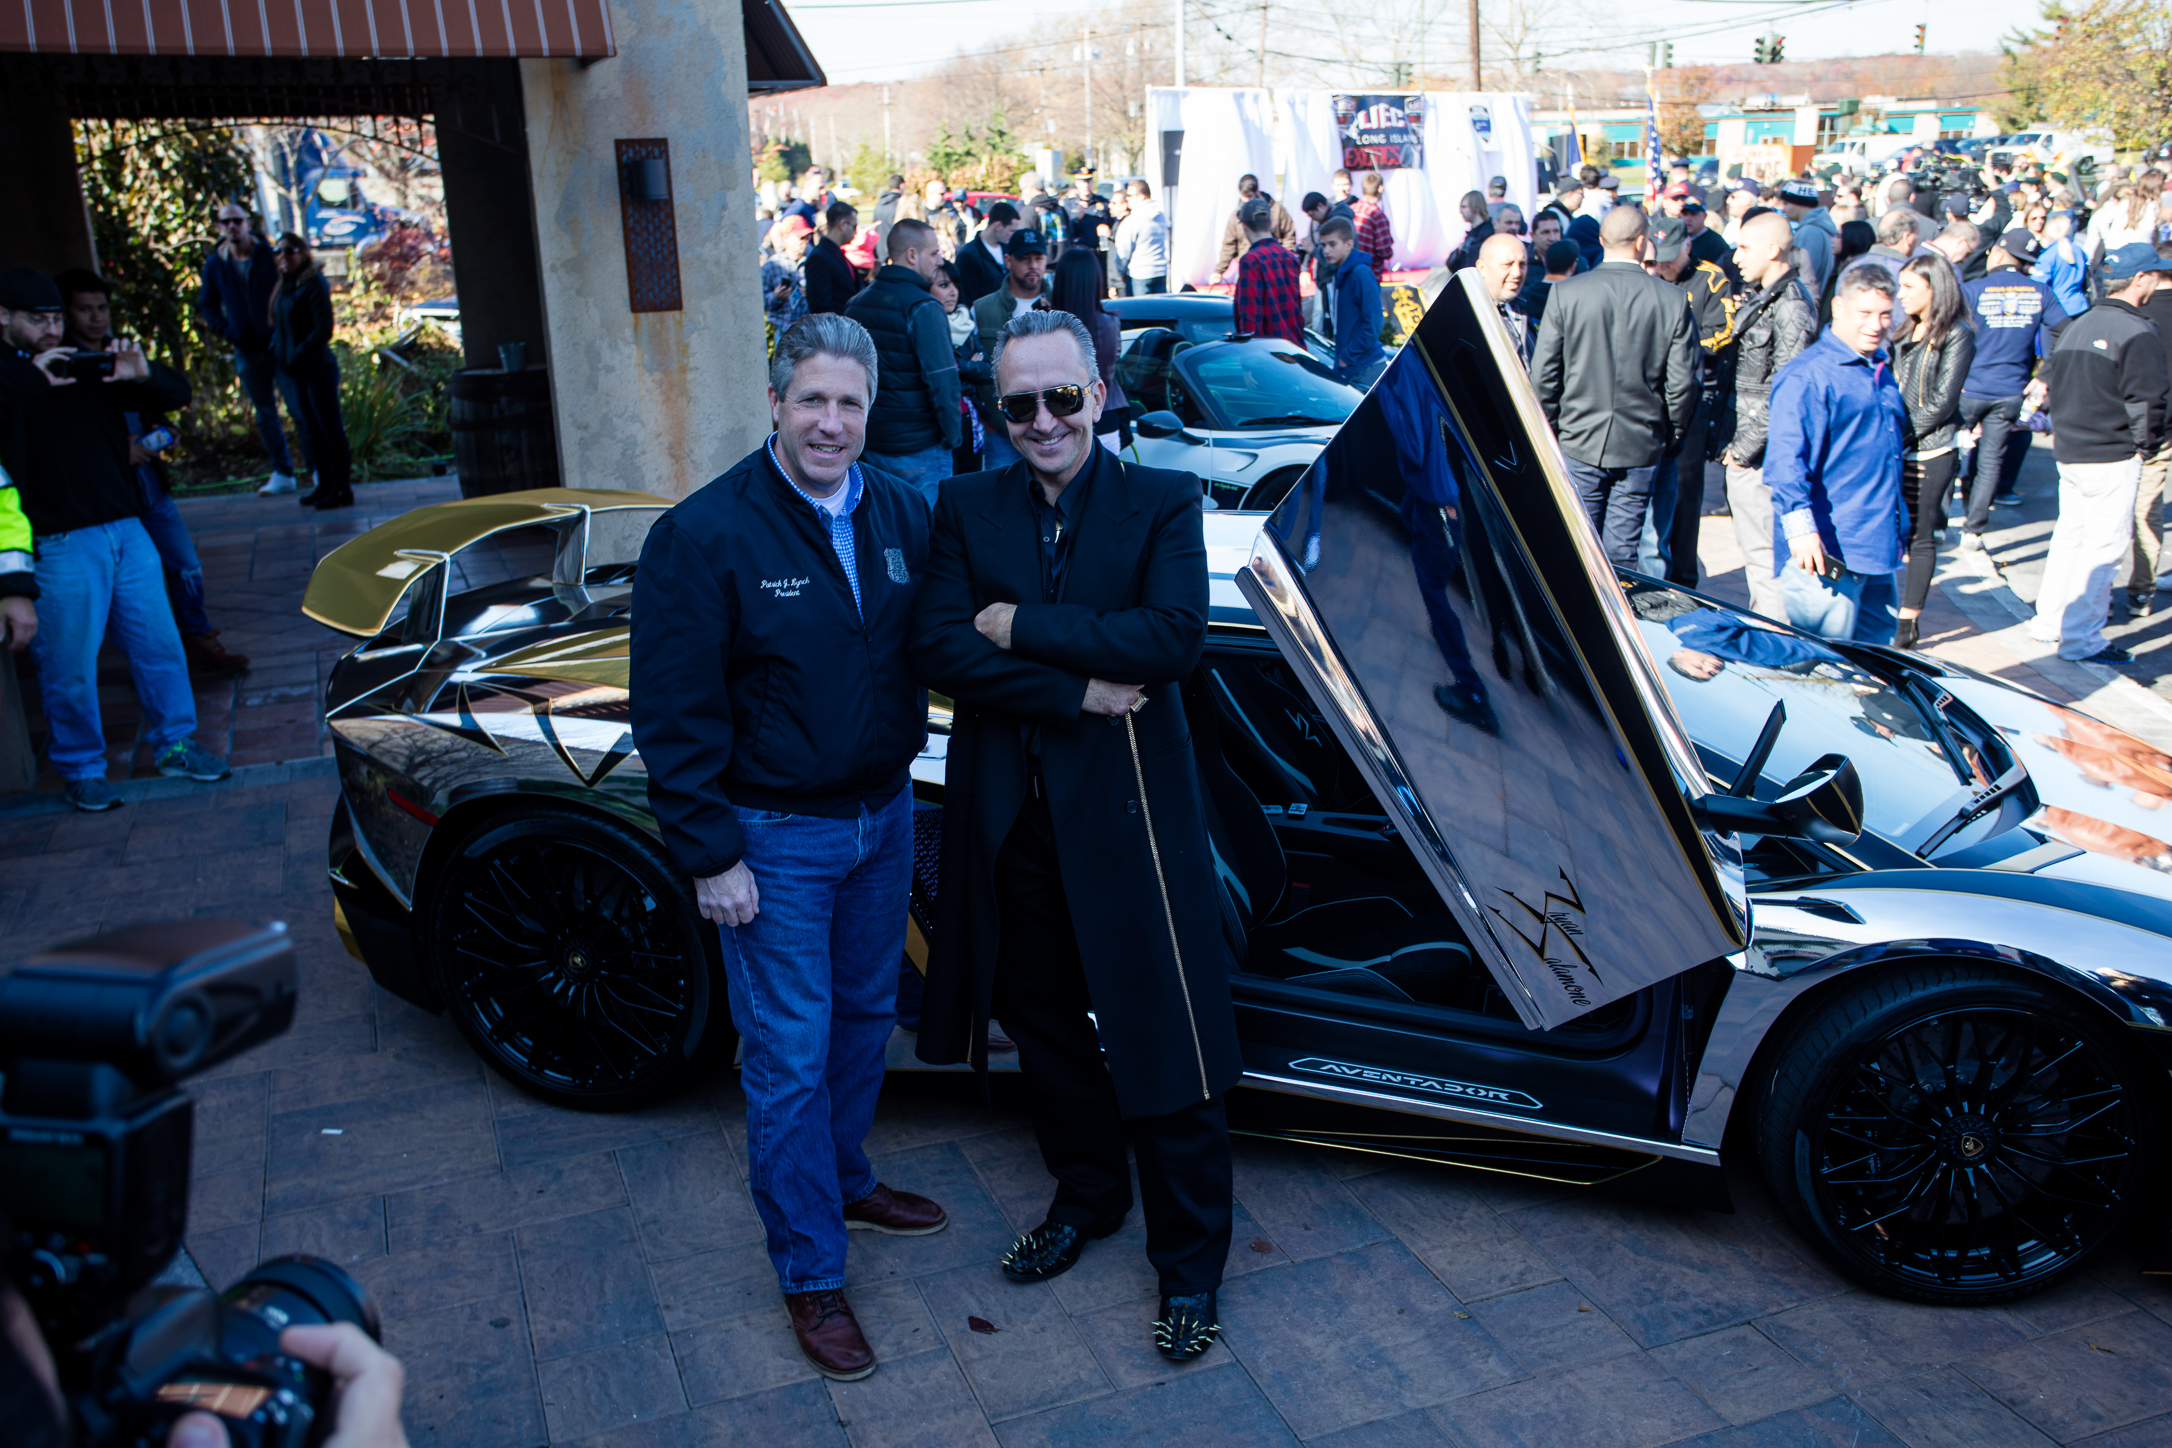 Bryan L. Salamone Participates in Exotic Car Rally Fundraiser for Families  of Fallen NYPD Officers